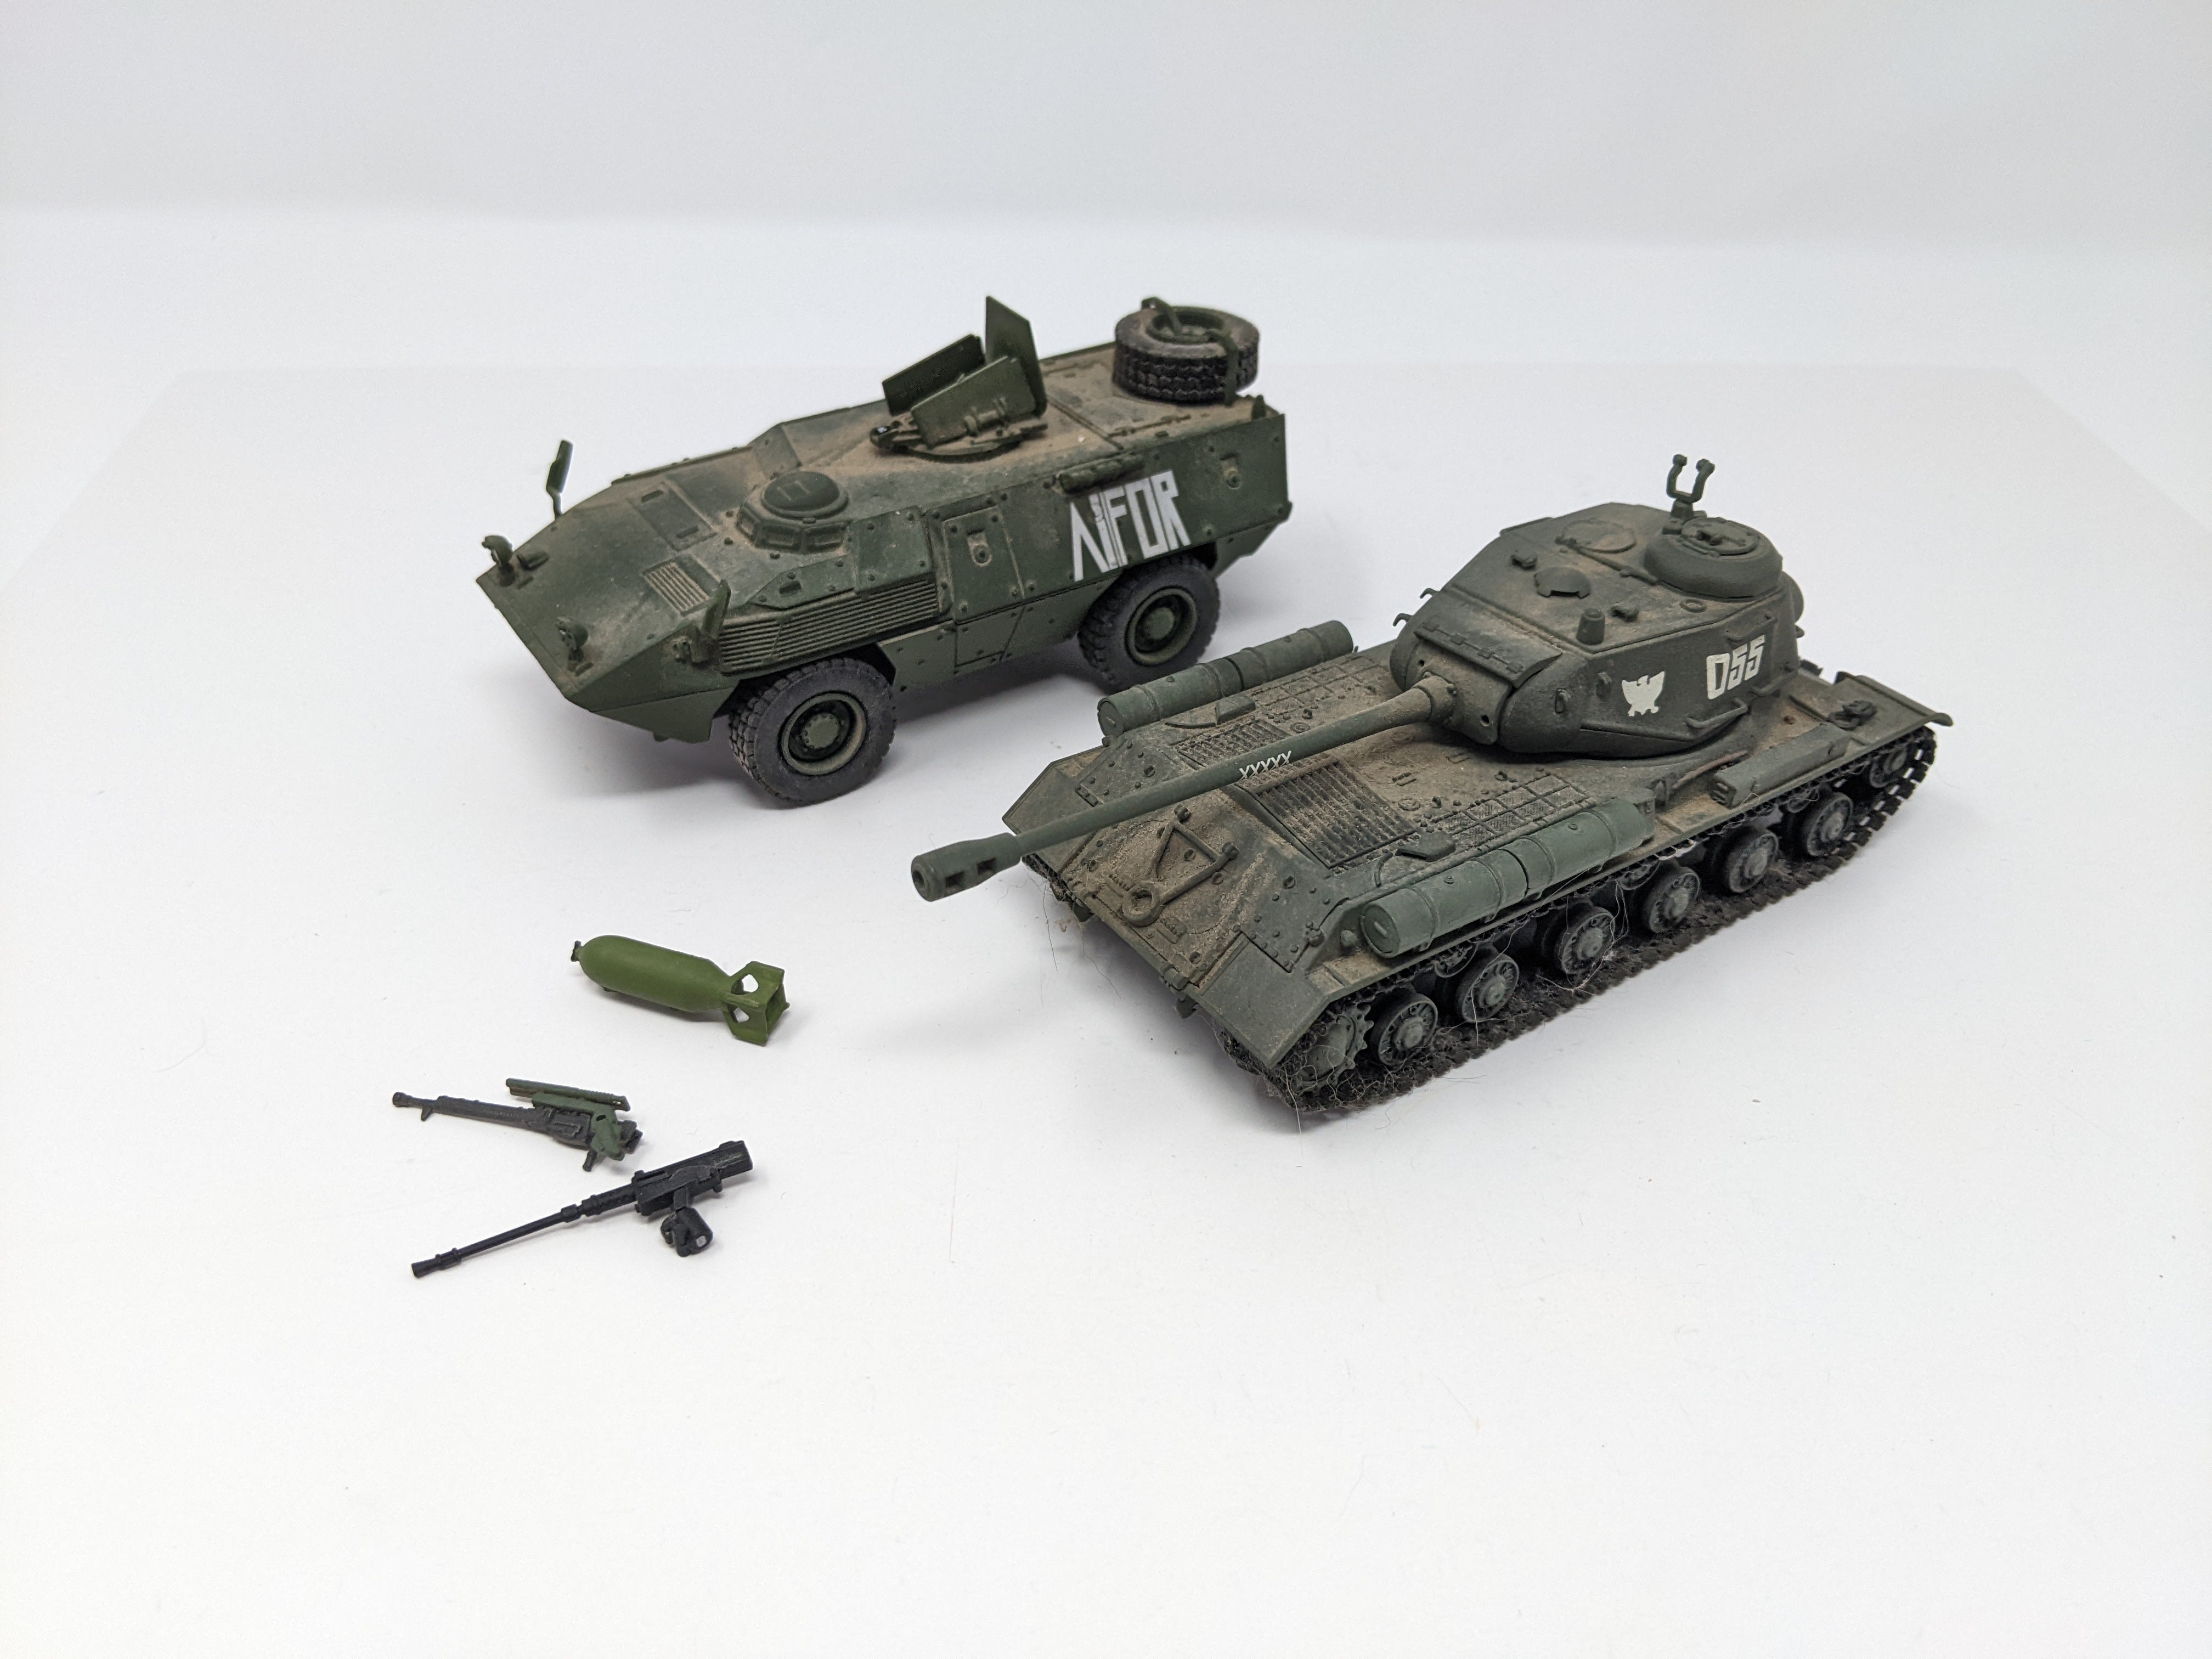 USED , Lot of 2 Army Tanks (Criel Model & Unbranded)